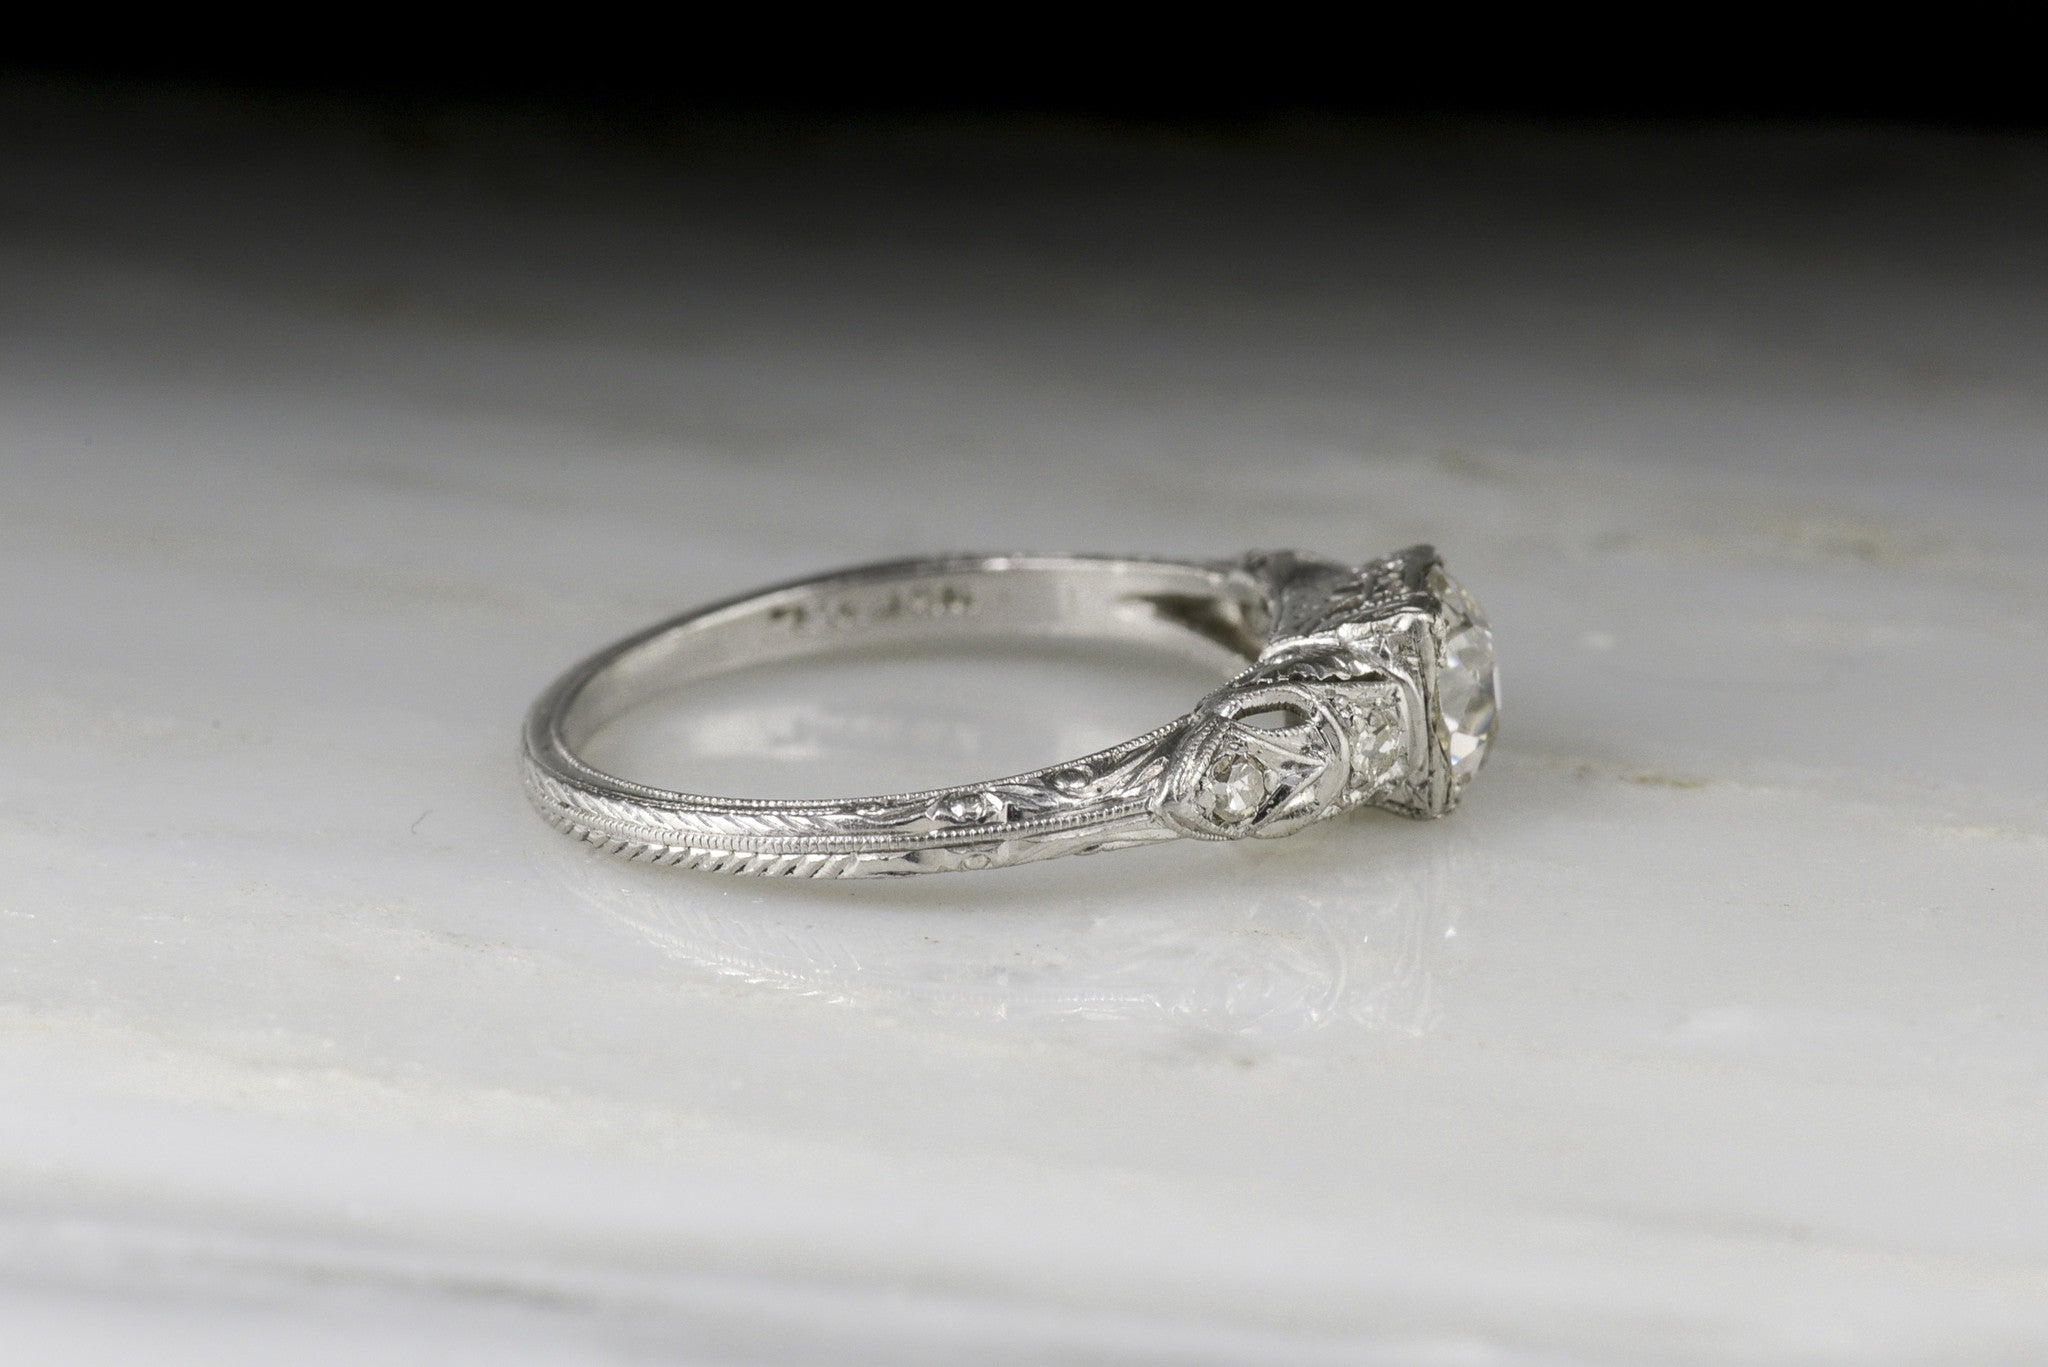 Antique Engagement Ring with French Japonisme Influences and Edwardian ...